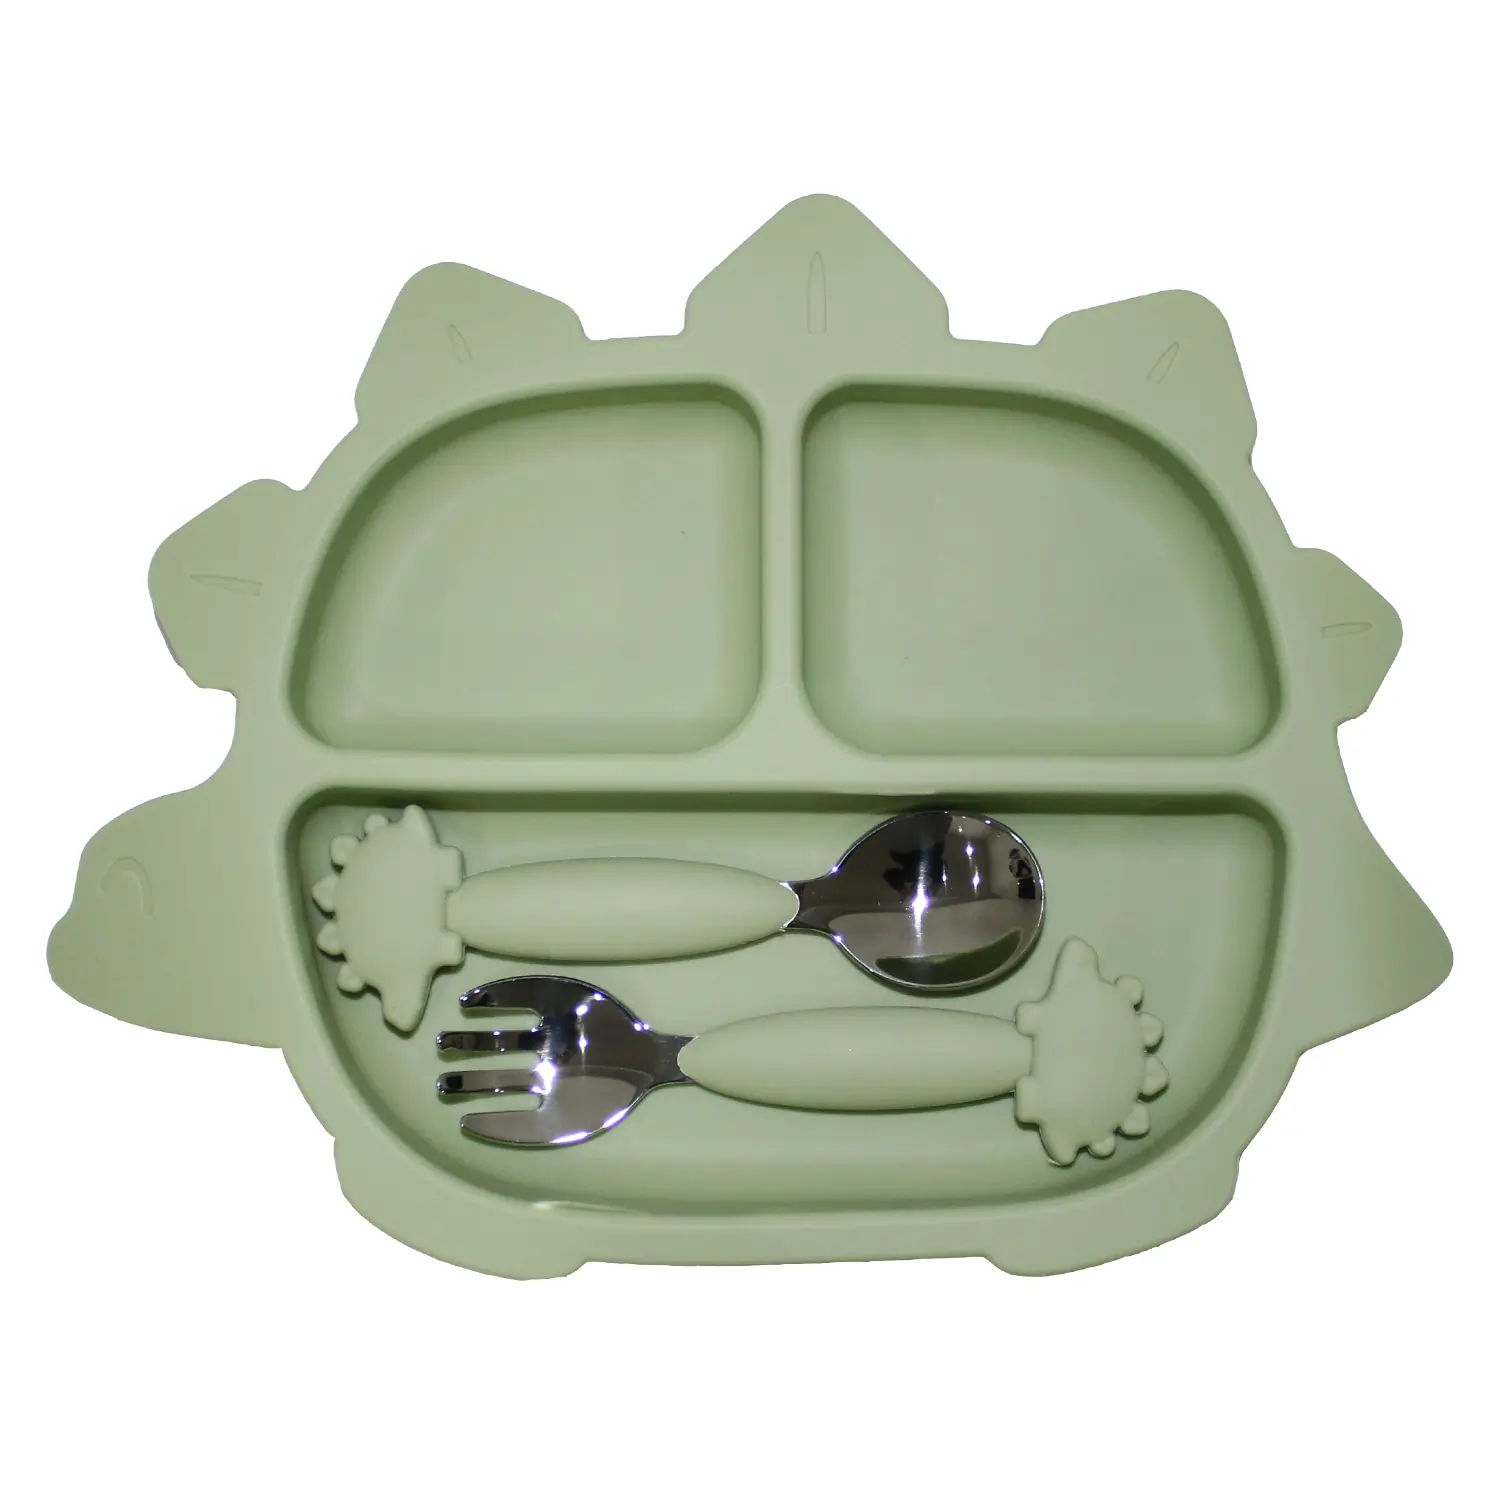 Green Dino Plate Set with spoon and fork